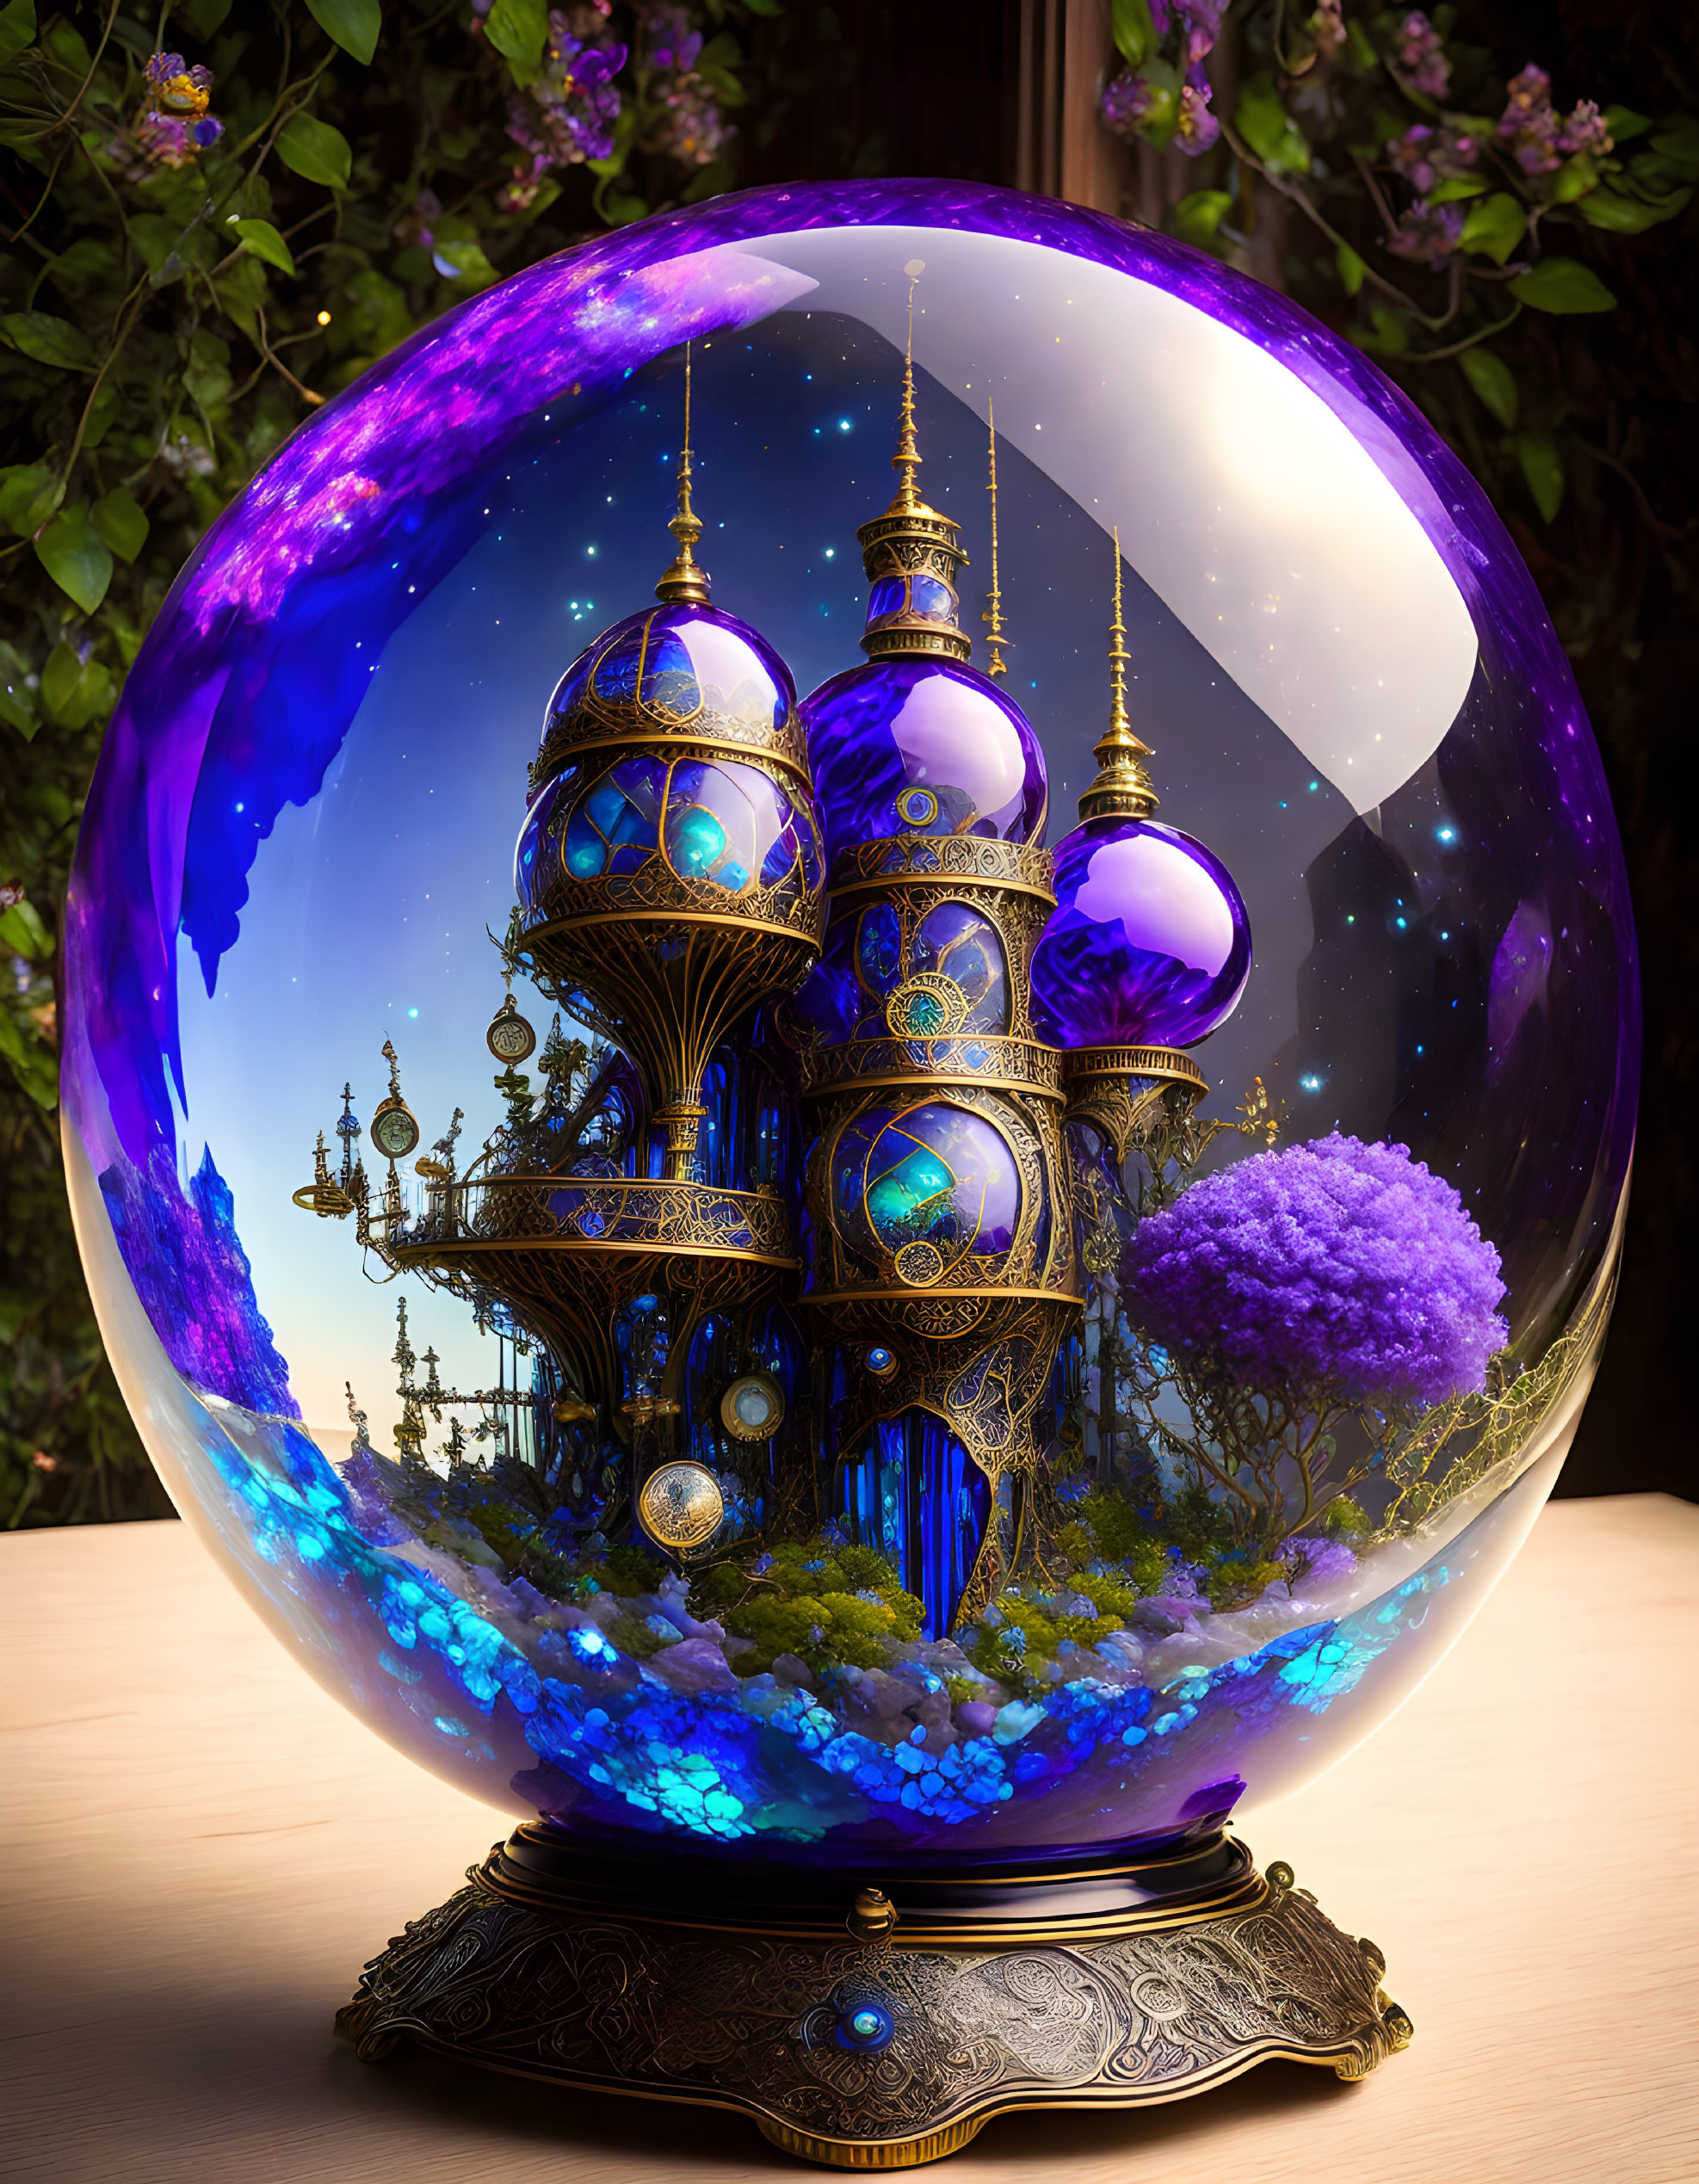 Fantasy castle scene in mystical crystal ball on ornate stand